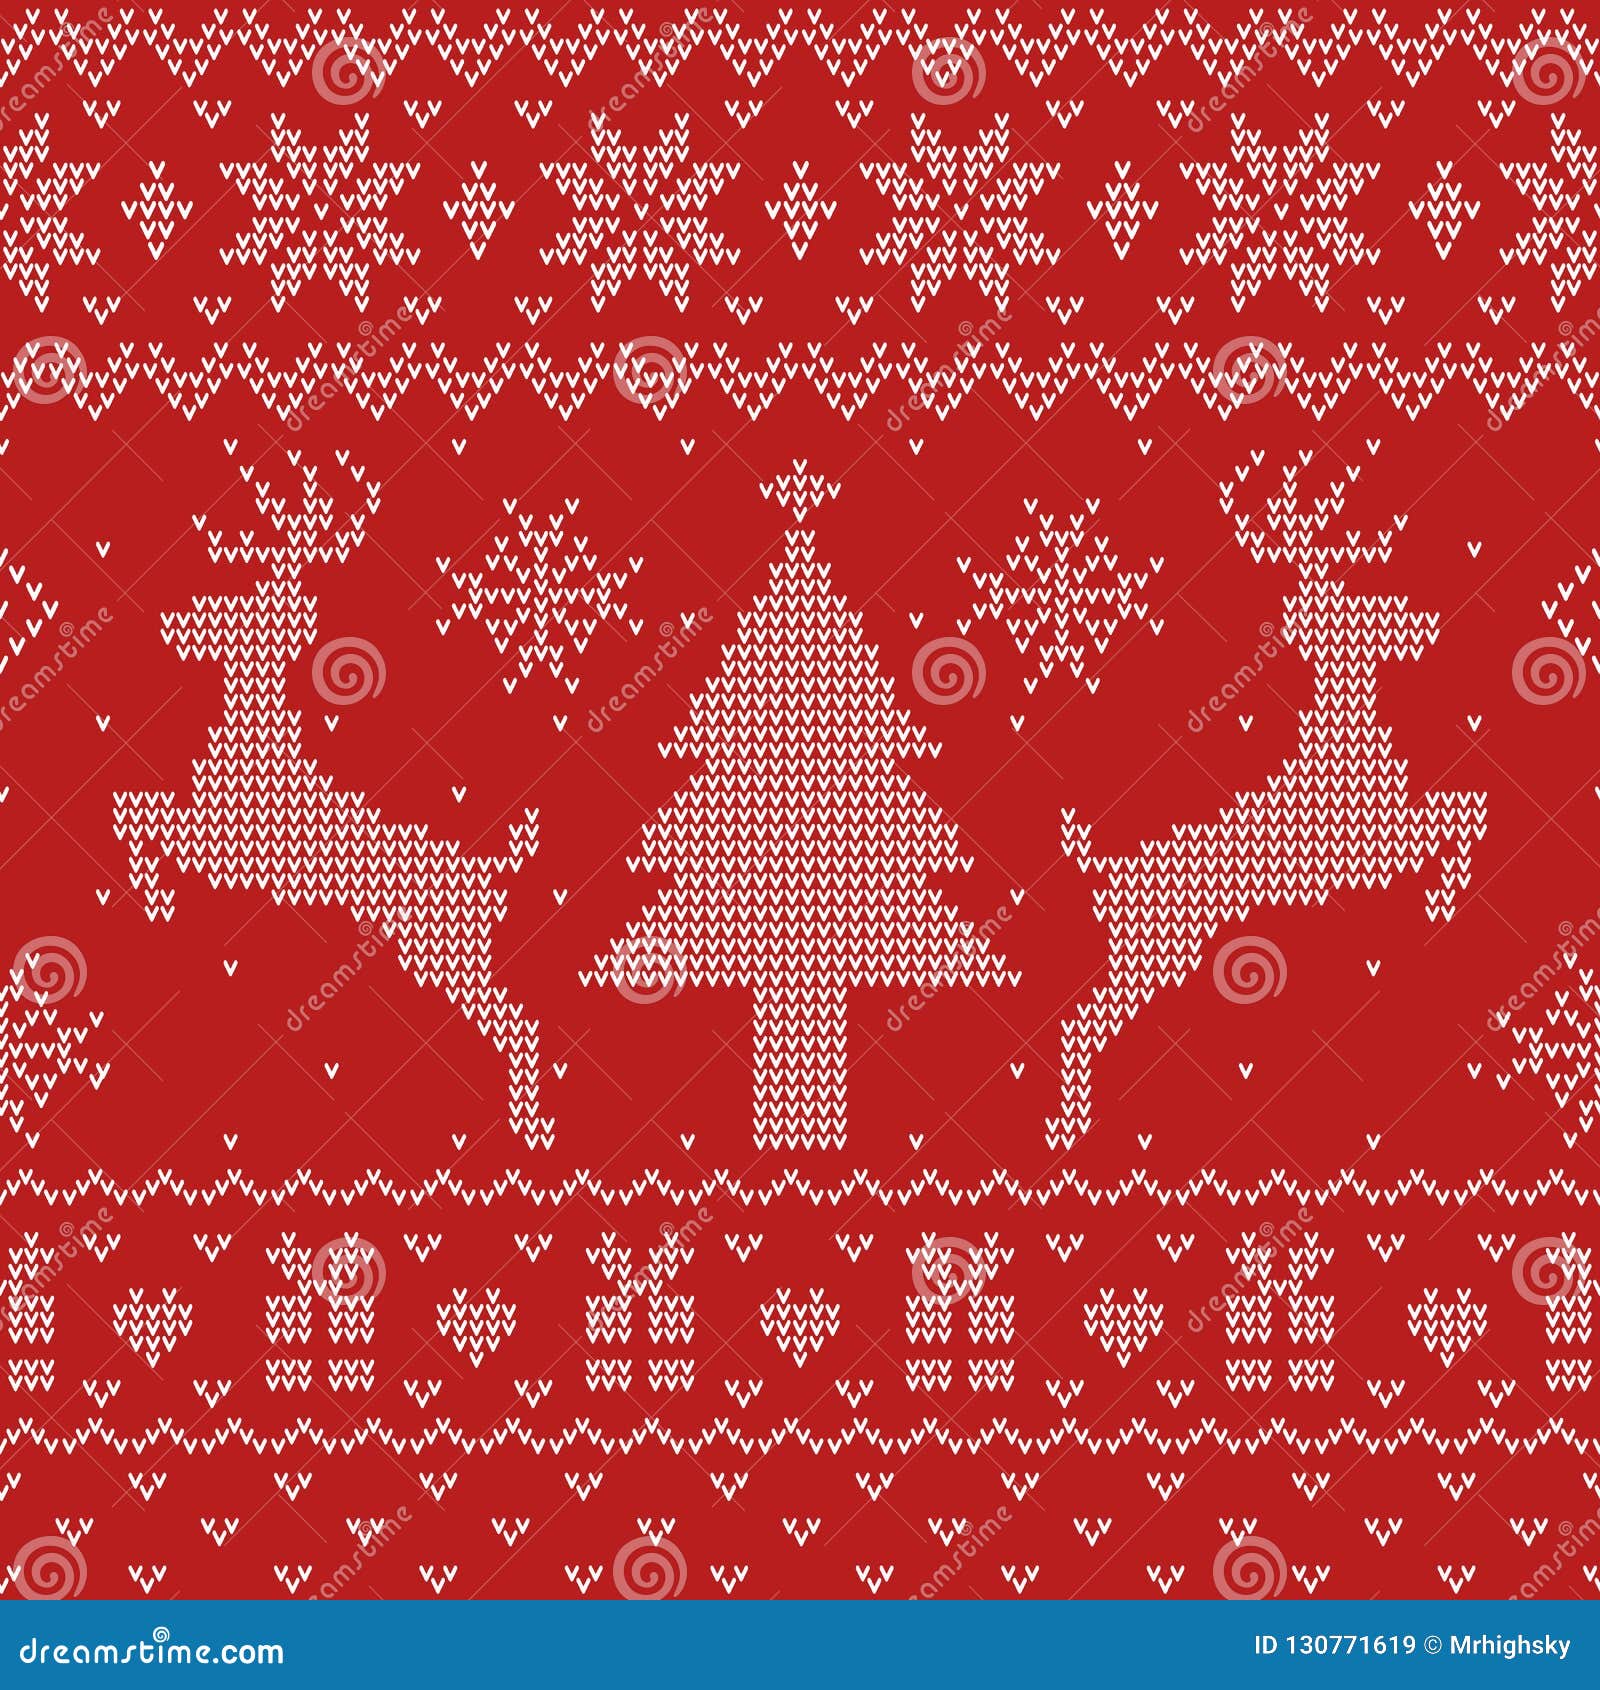 Ugly Christmas Sweater Seamless Pattern Stock Vector Illustration Of Ugly Sweater 130771619